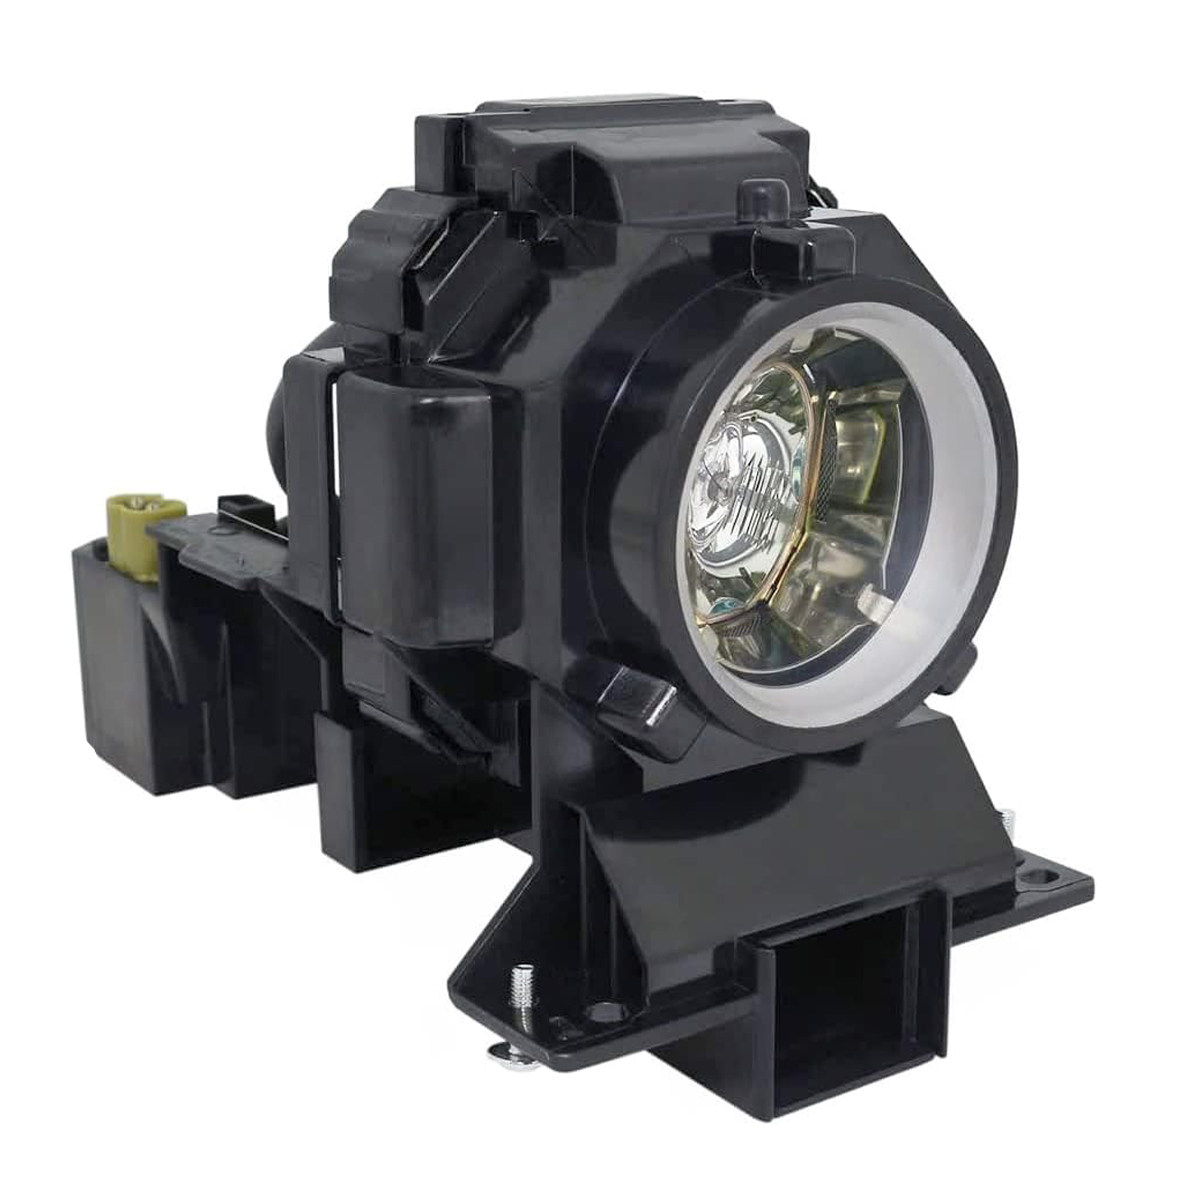 Replacement Projector lamp SP-LAMP-079 For Infocus IN5542 IN5544